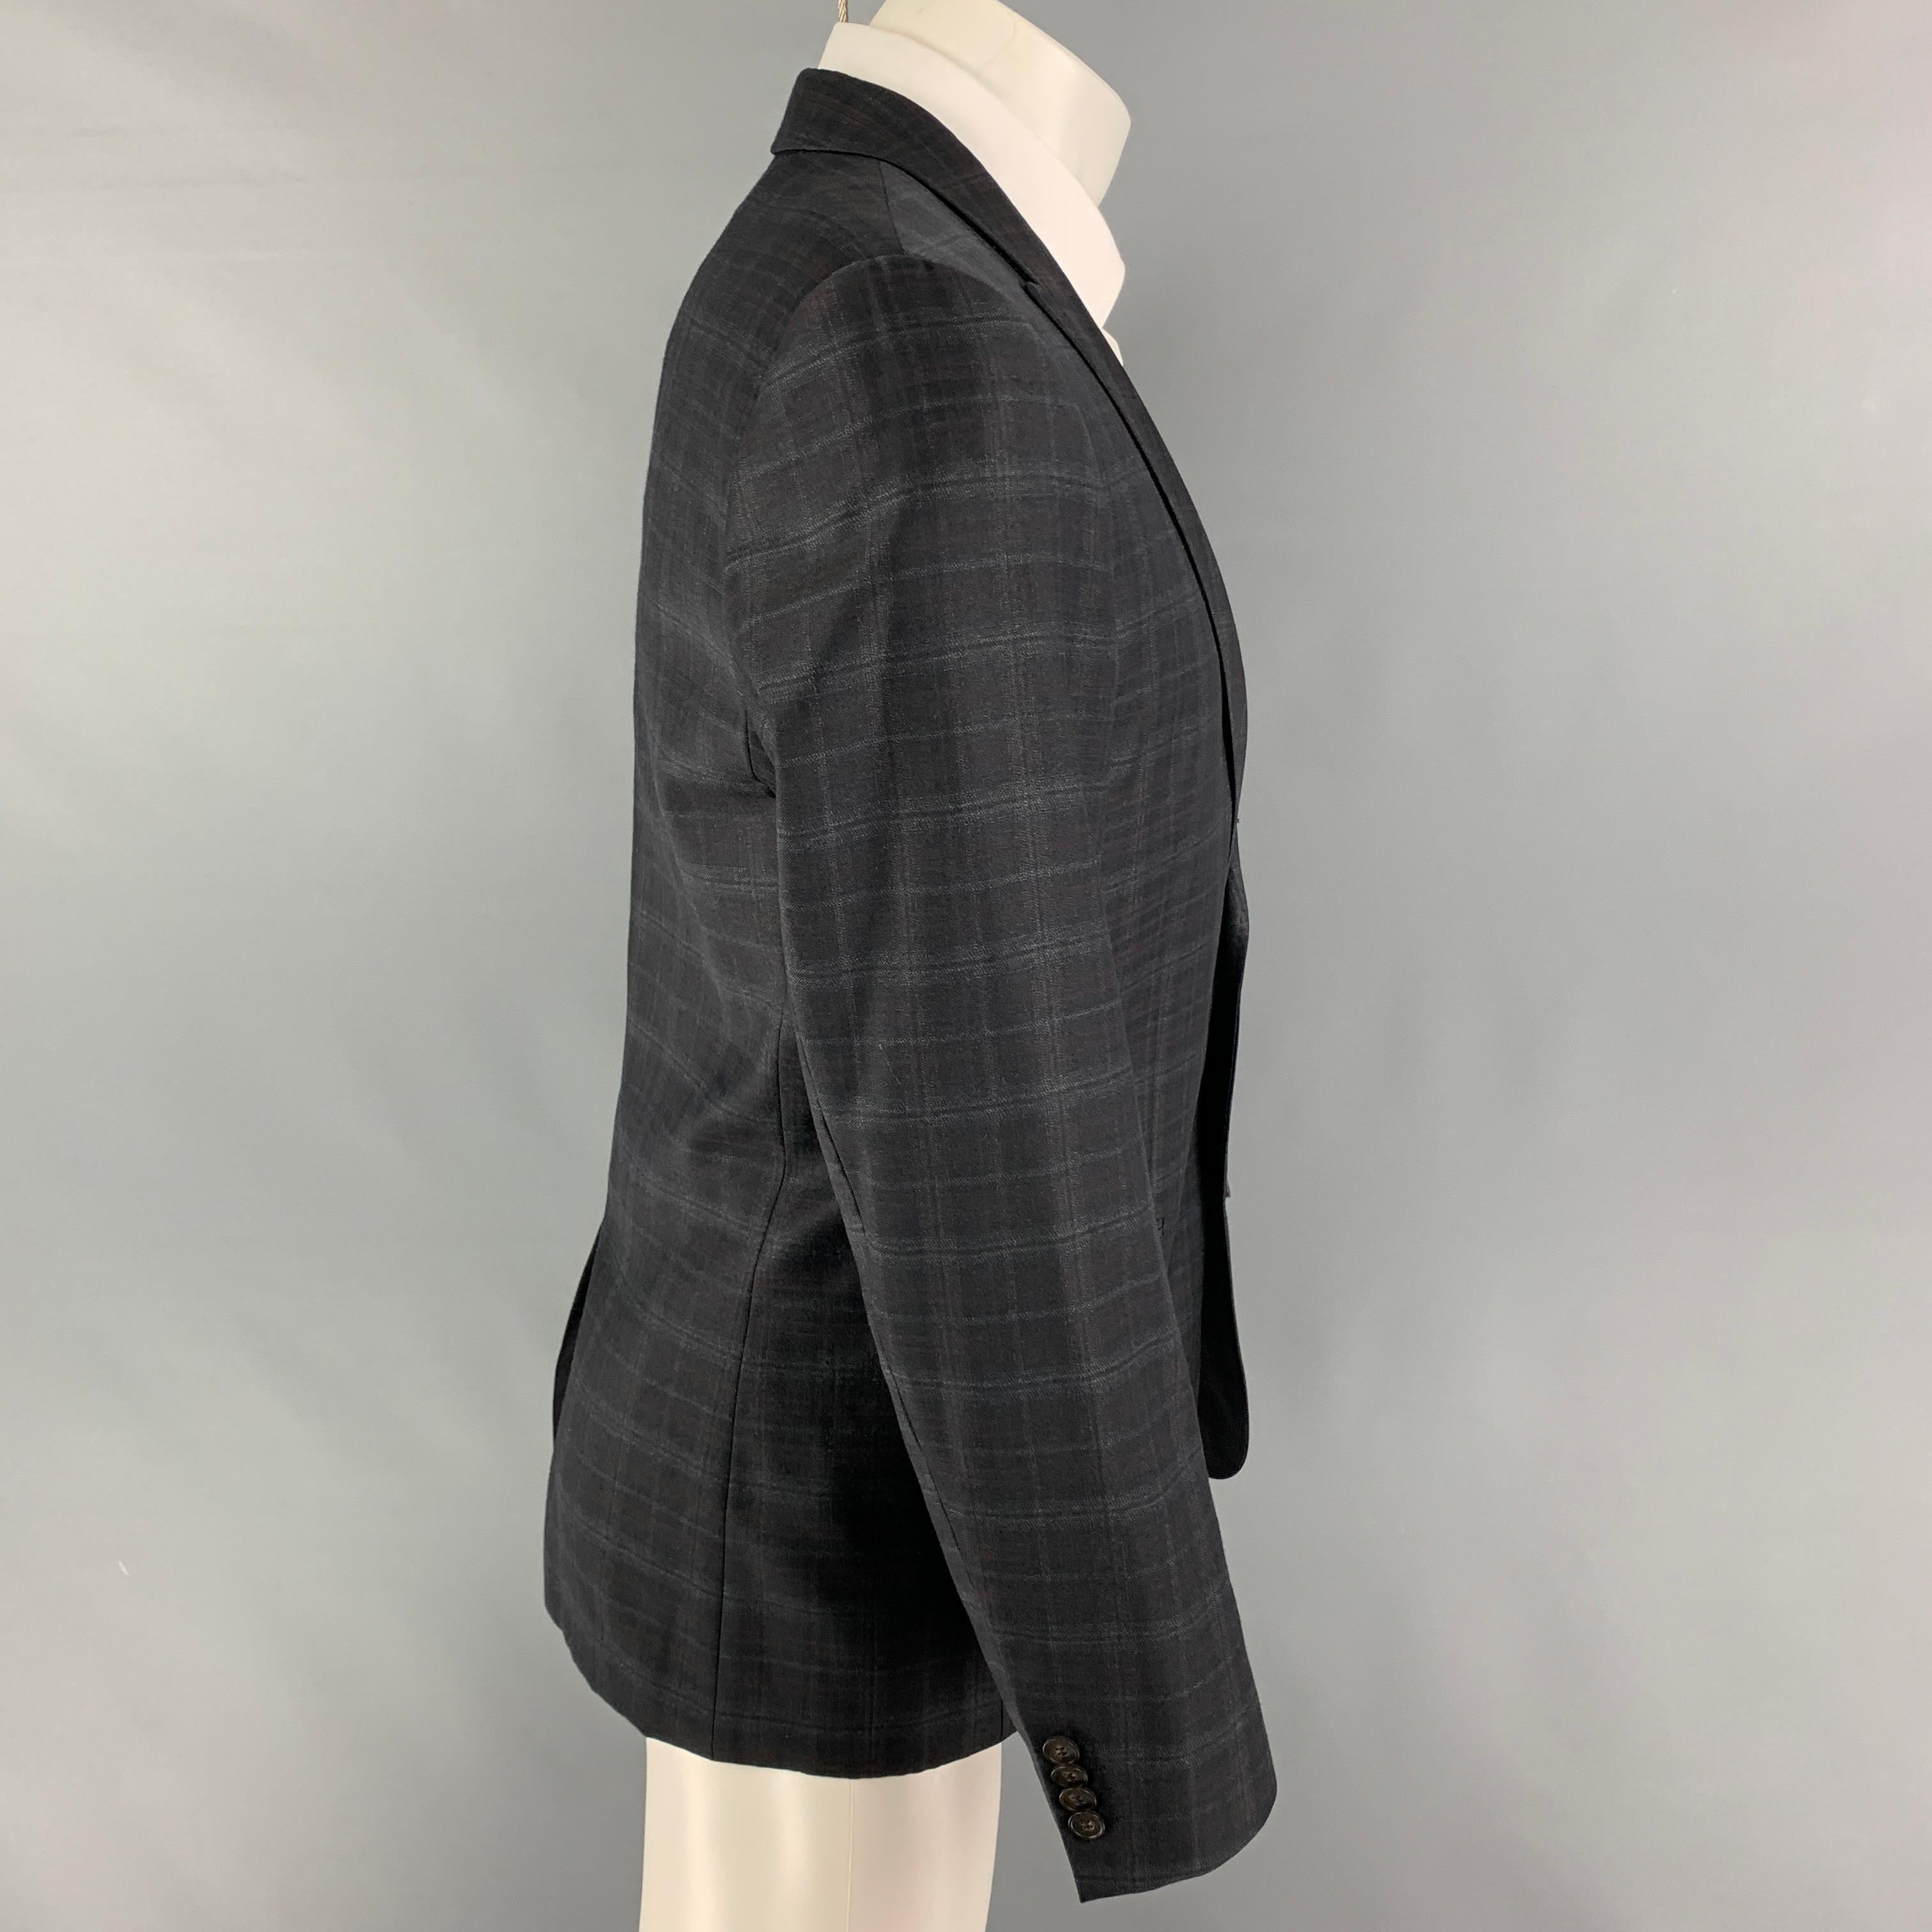 HUGO by HUGO BOSS sport coat comes in a grey & brown plaid virgin wool with a full liner featuring a peak lapel, slit pockets, single back vent, and a double button closure. 

Very Good Pre-Owned Condition.
Marked: 48/38
Original Retail Price: